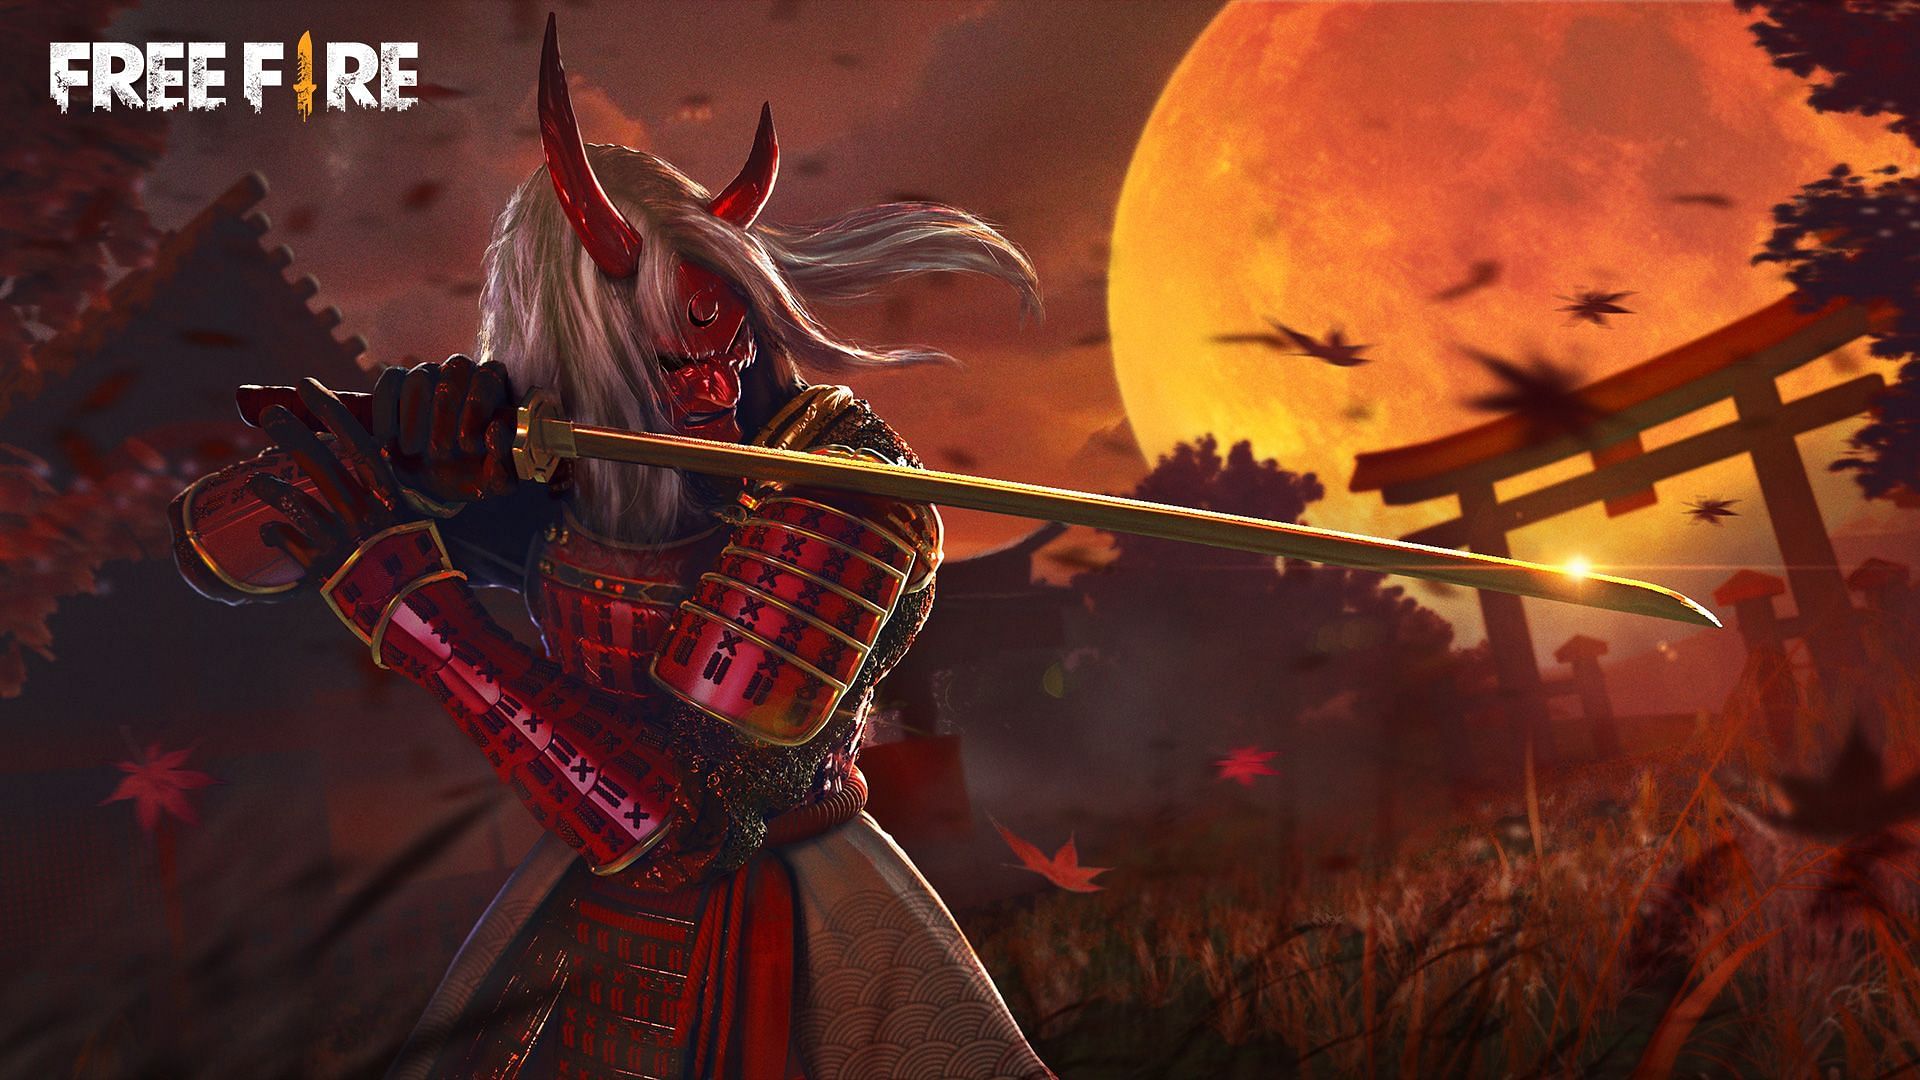 Zombified Samurai is one of the rarest bundles according to the community (Image via Garena)